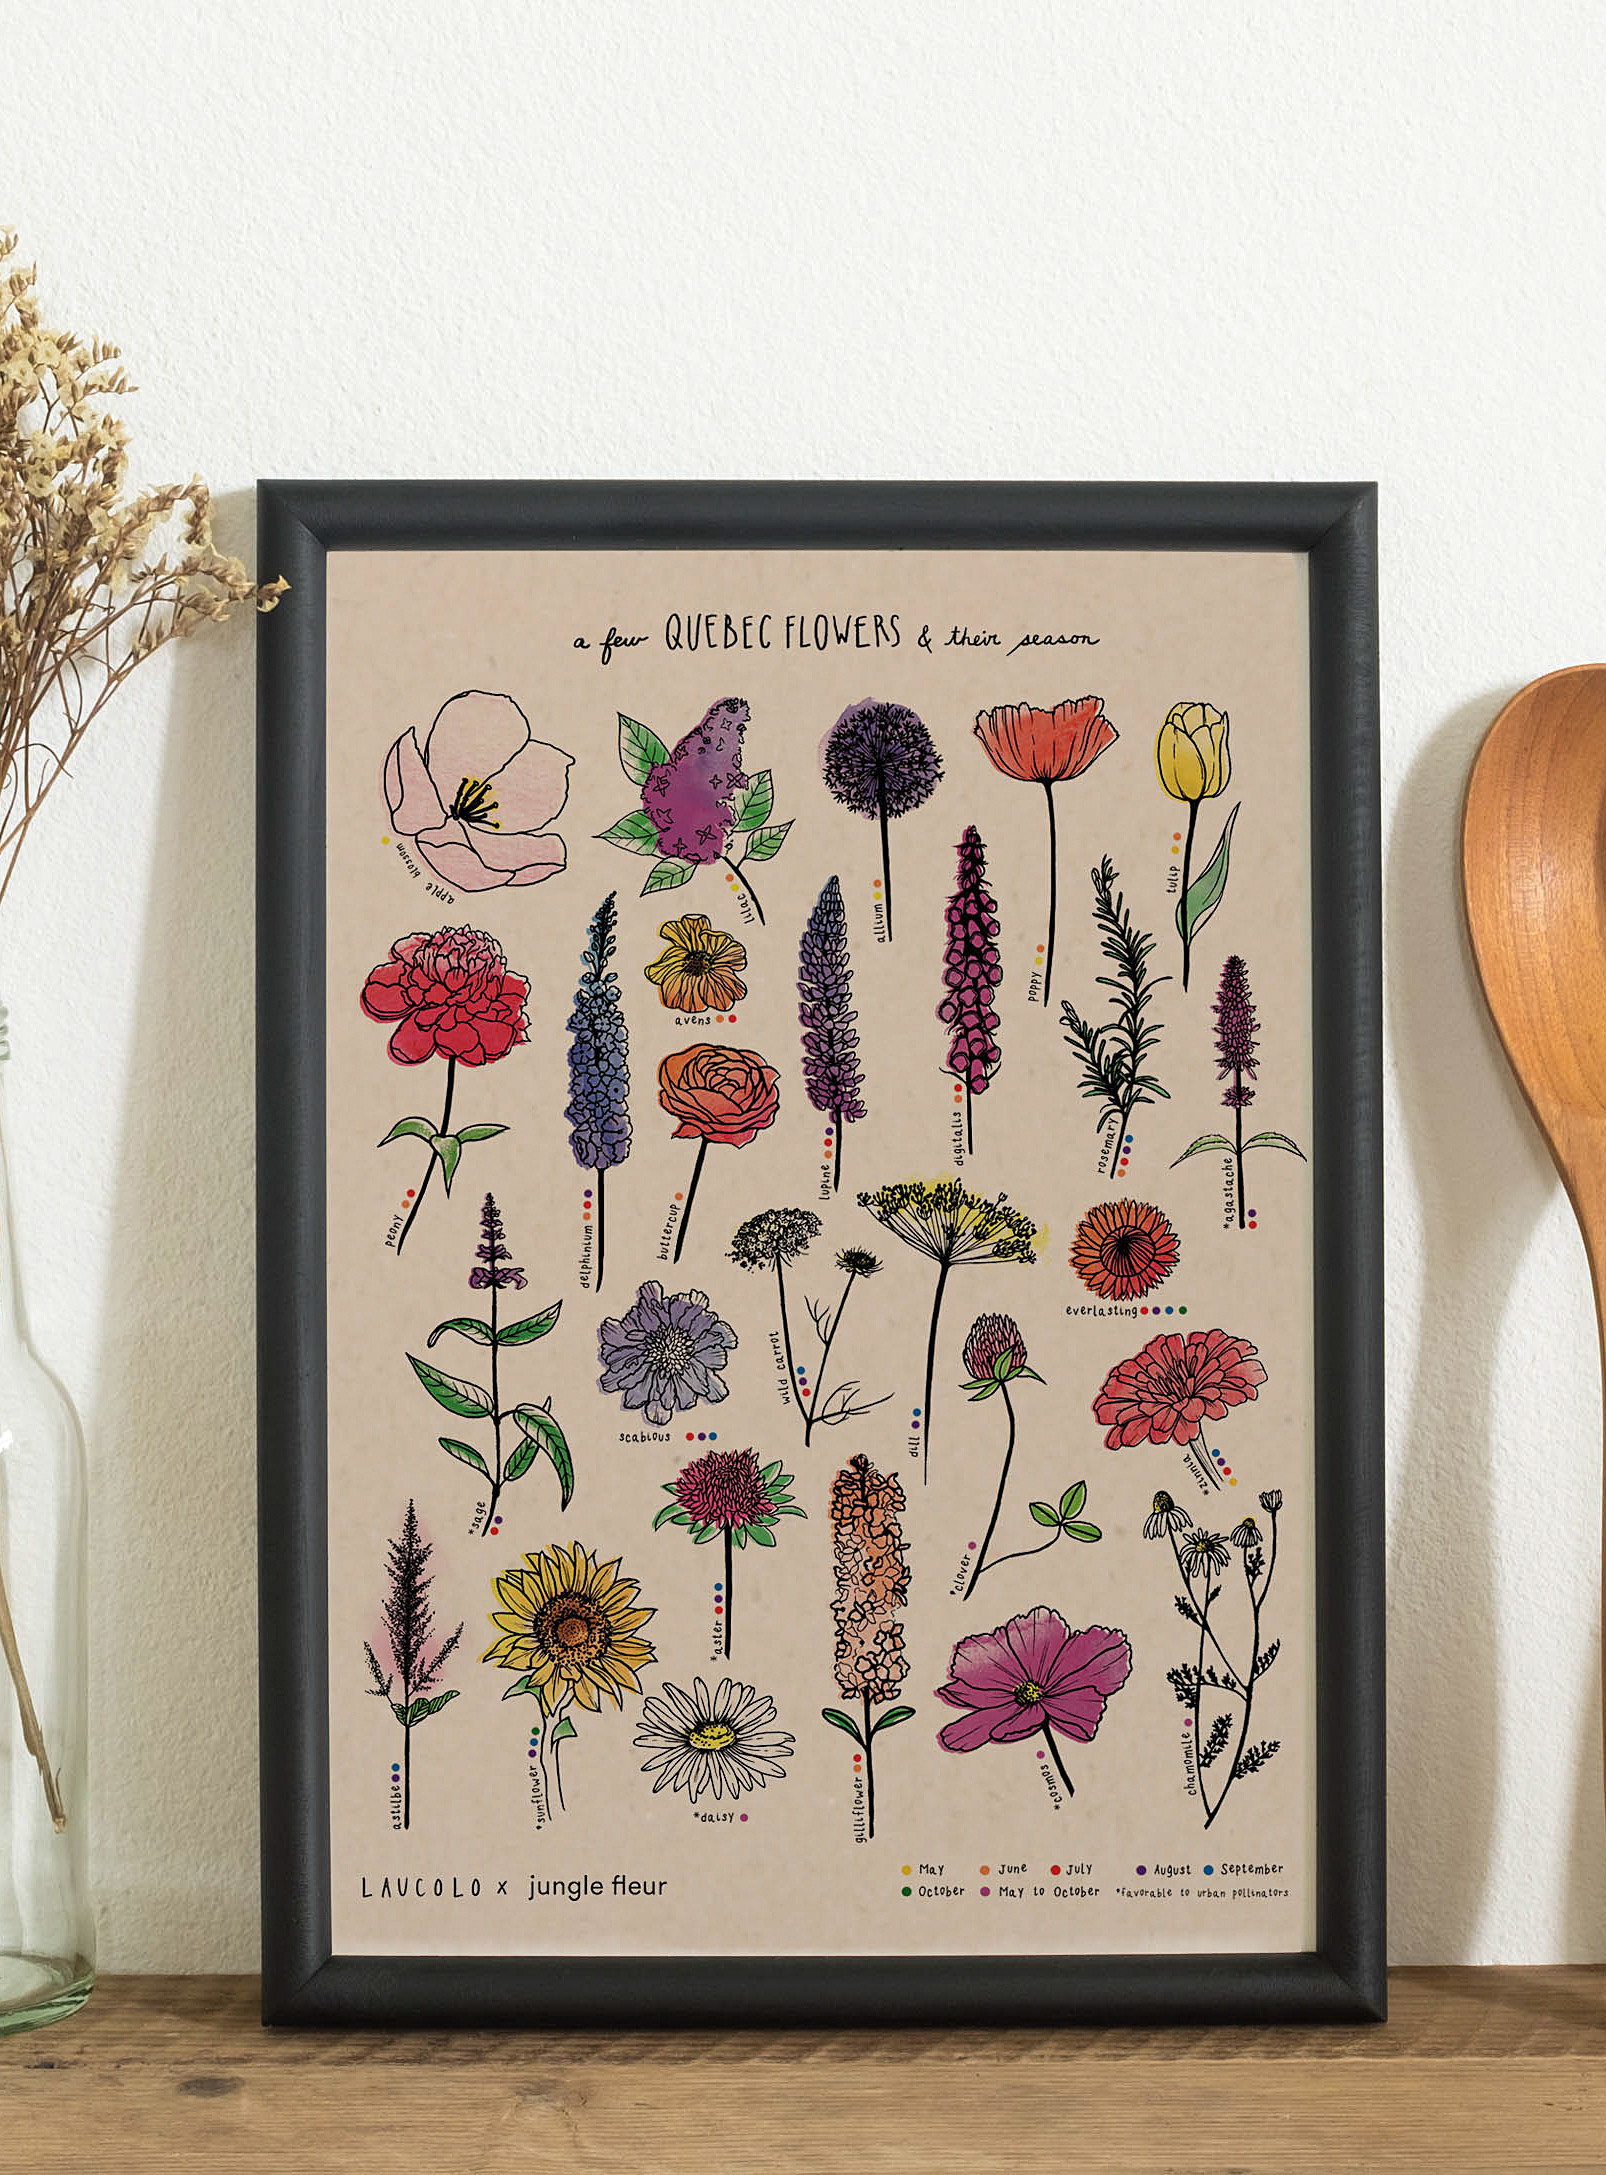 A framed art print of different flowers leaning against the wall